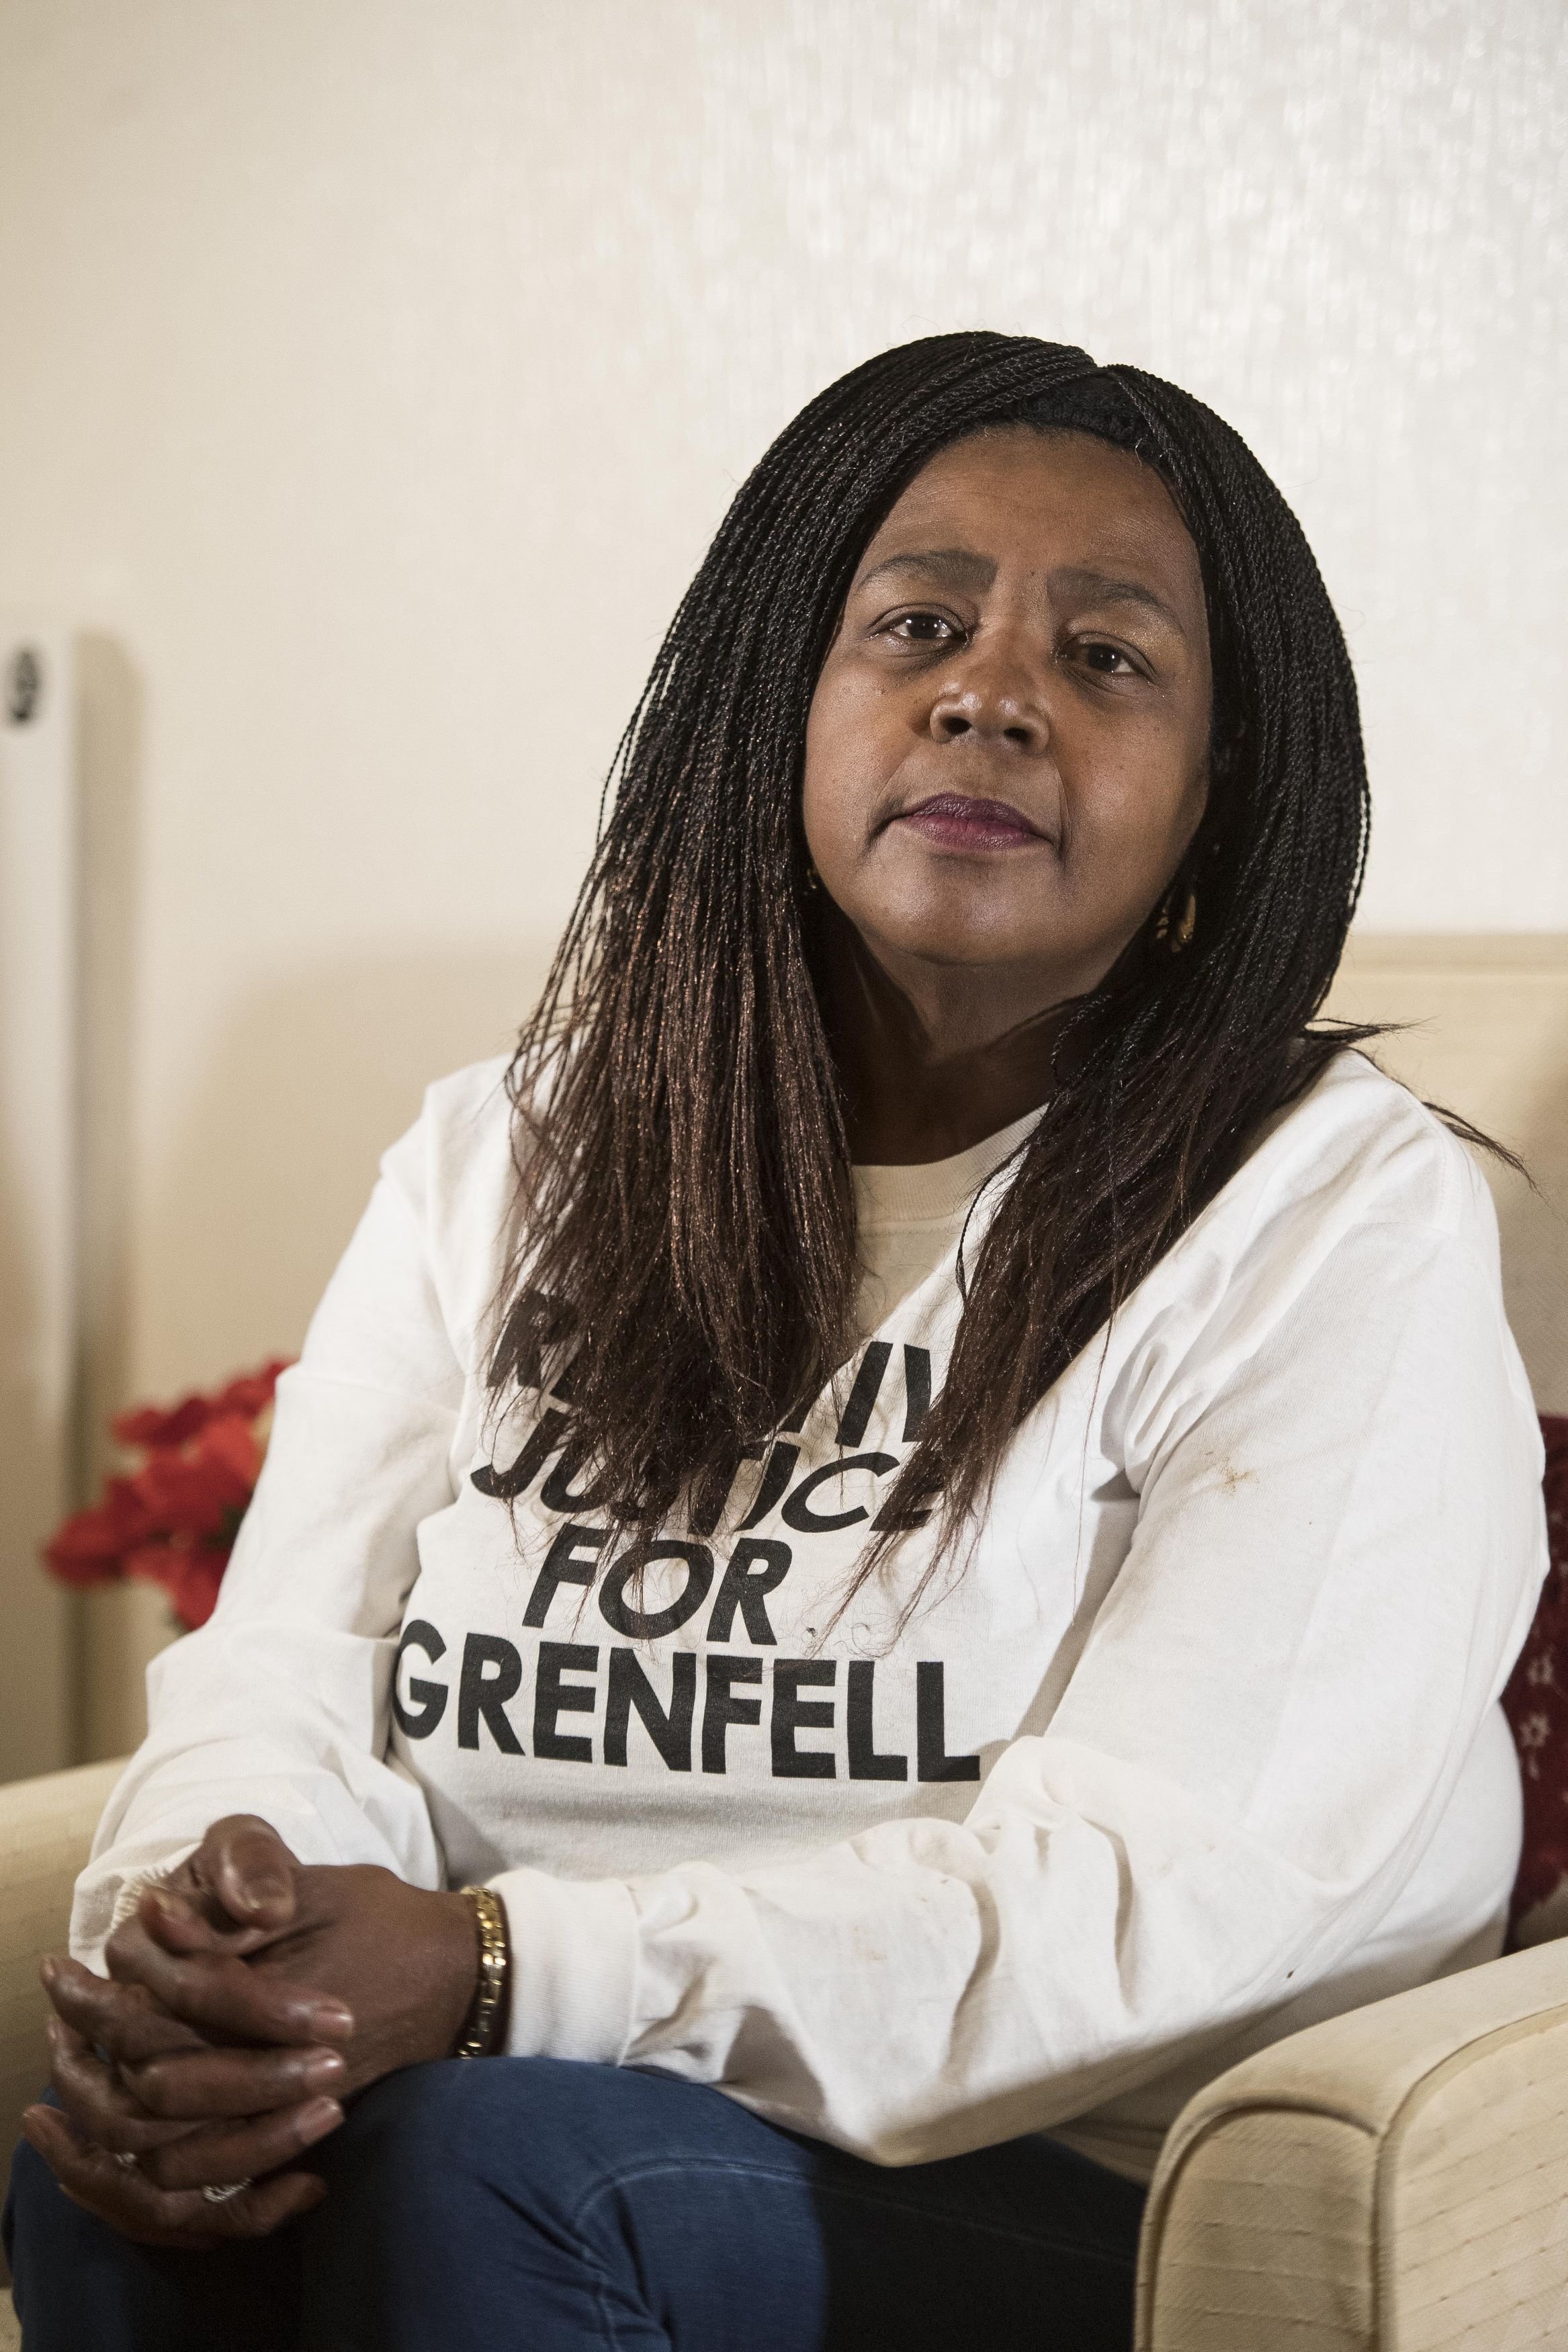 <strong>Clarrie Mendy said the Grenfell Tower fire is a nightmare that's 'getting darker every day'&nbsp;</strong>